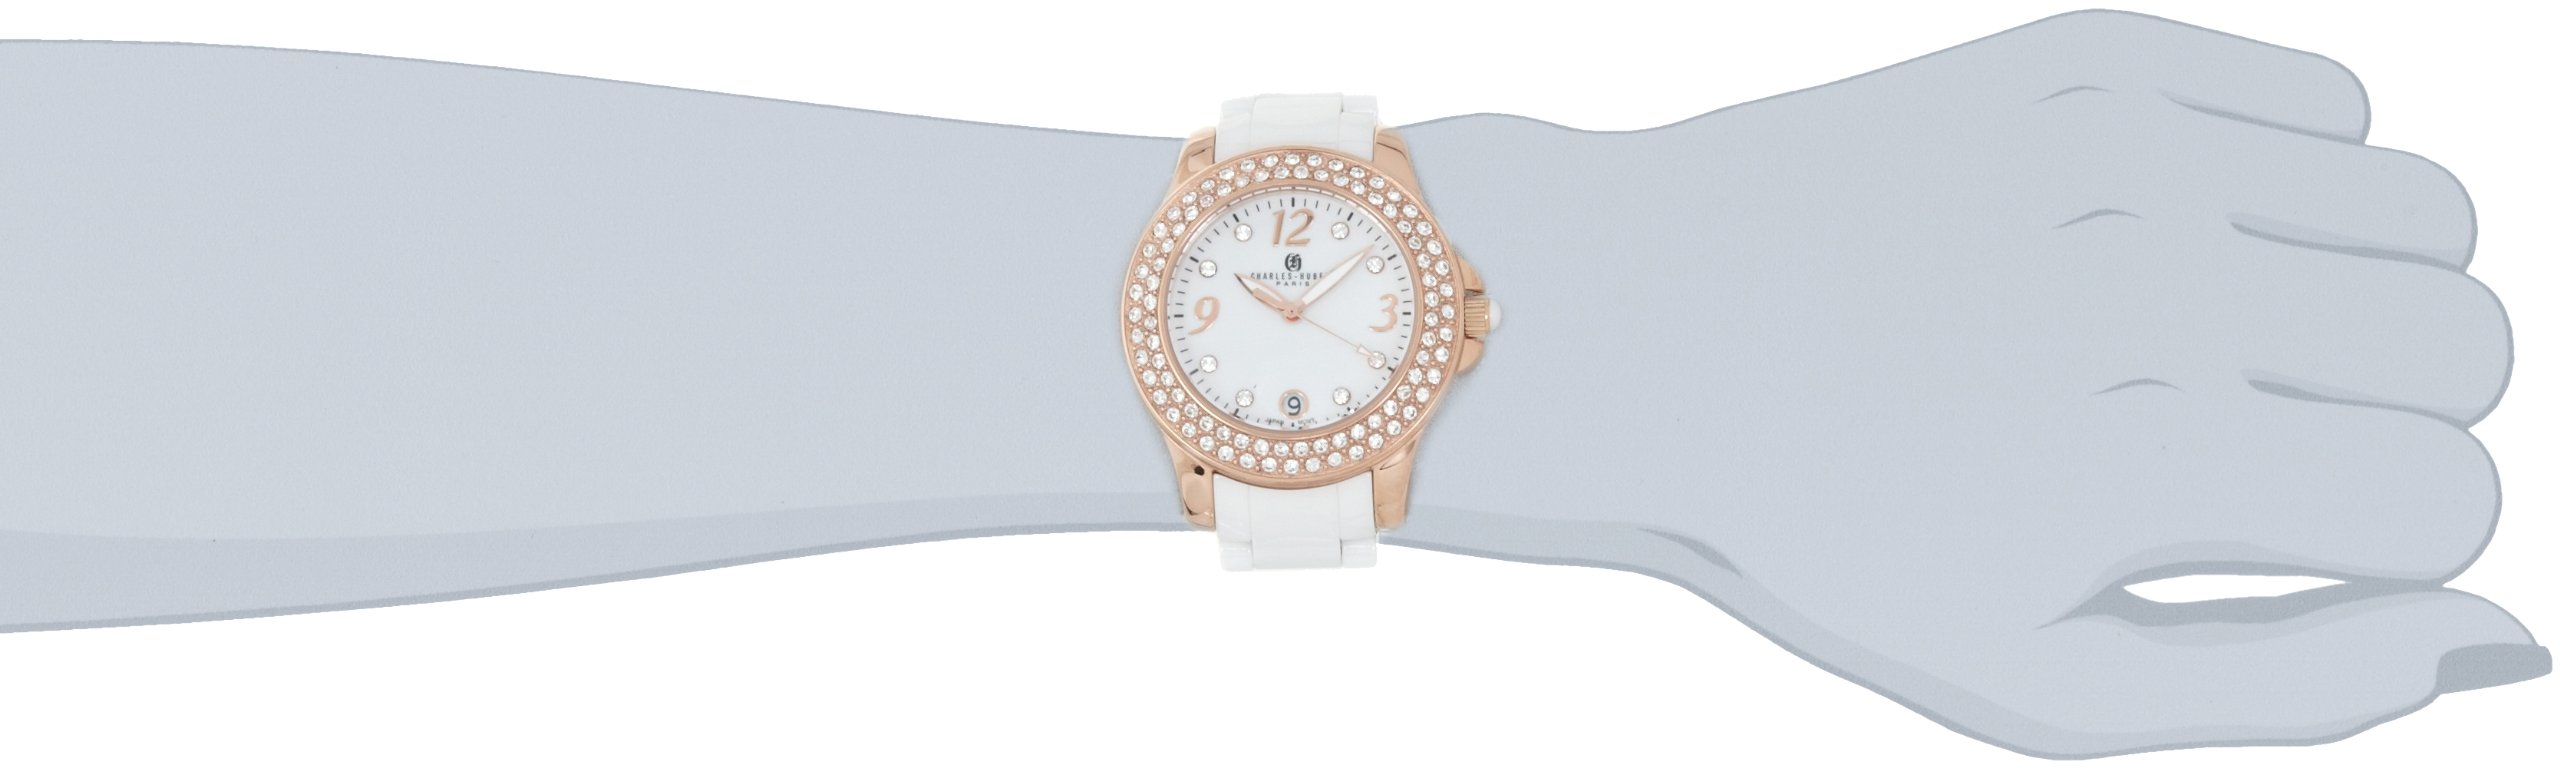 Charles-Hubert, Paris Women's 6789-WRG Premium Collection Ceramic and Stainless Steel with Swarovski Crystal Watch